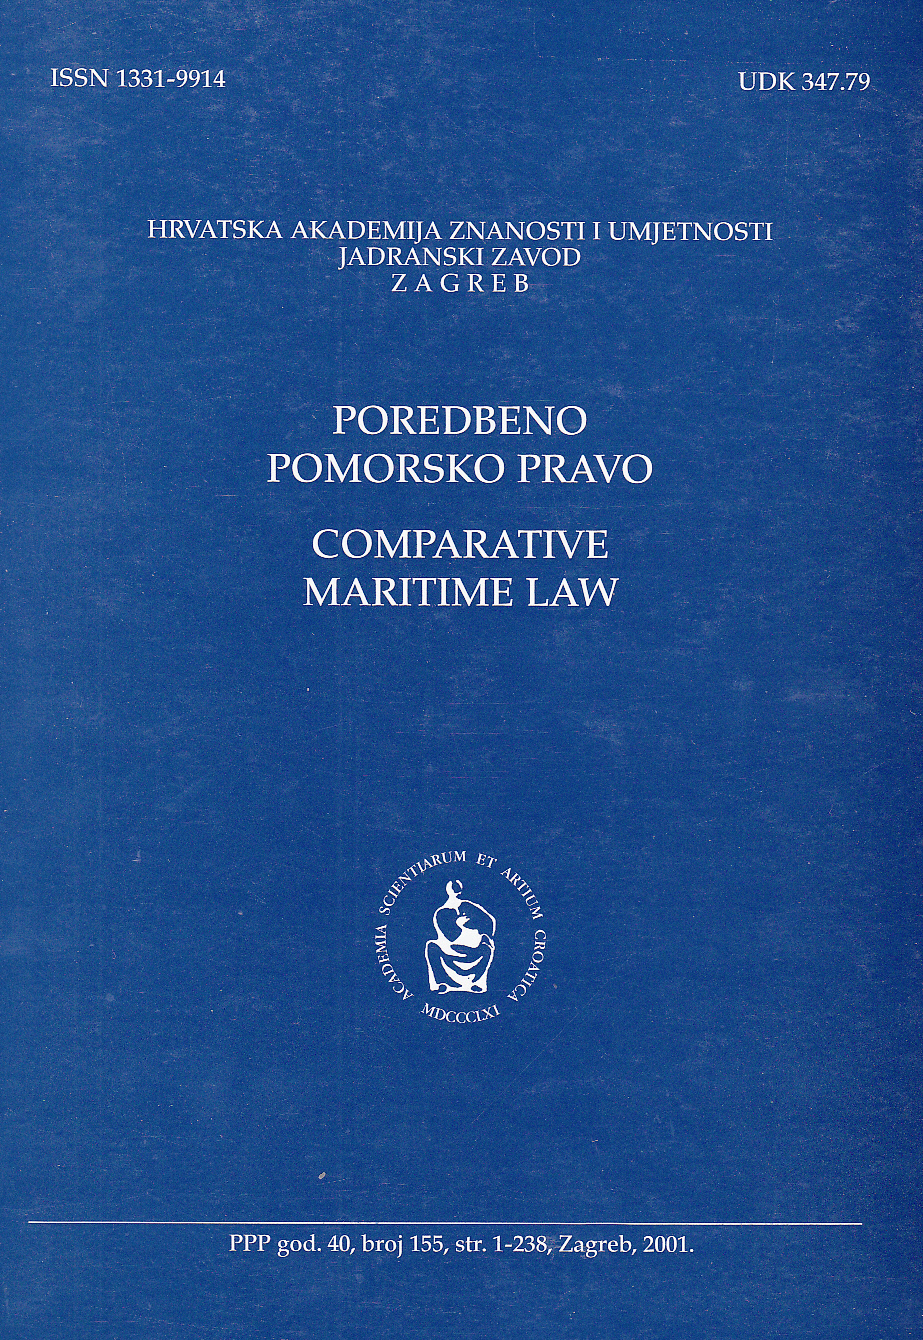 Causes and consequences of the Amendments to STCW Convention, 1978 Cover Image